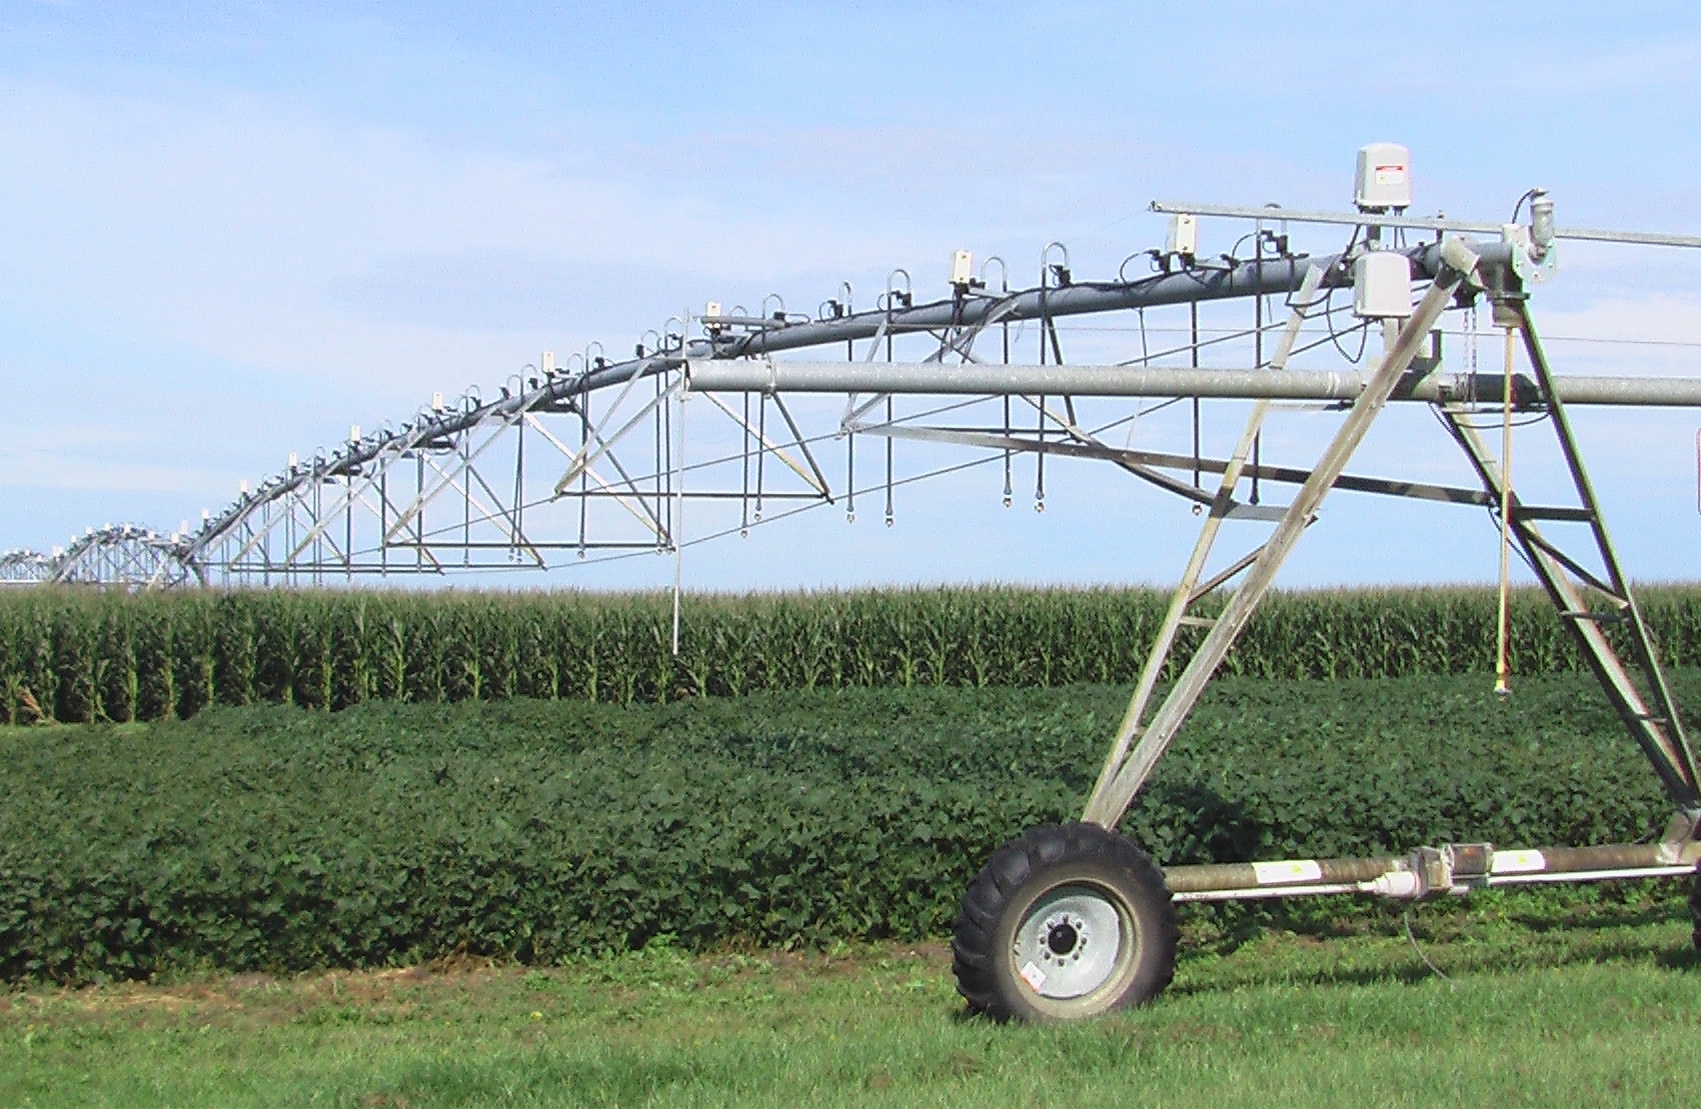 With a reliable water source, investing in irrigation can be a hedge against drought periods. (NDSU photo)